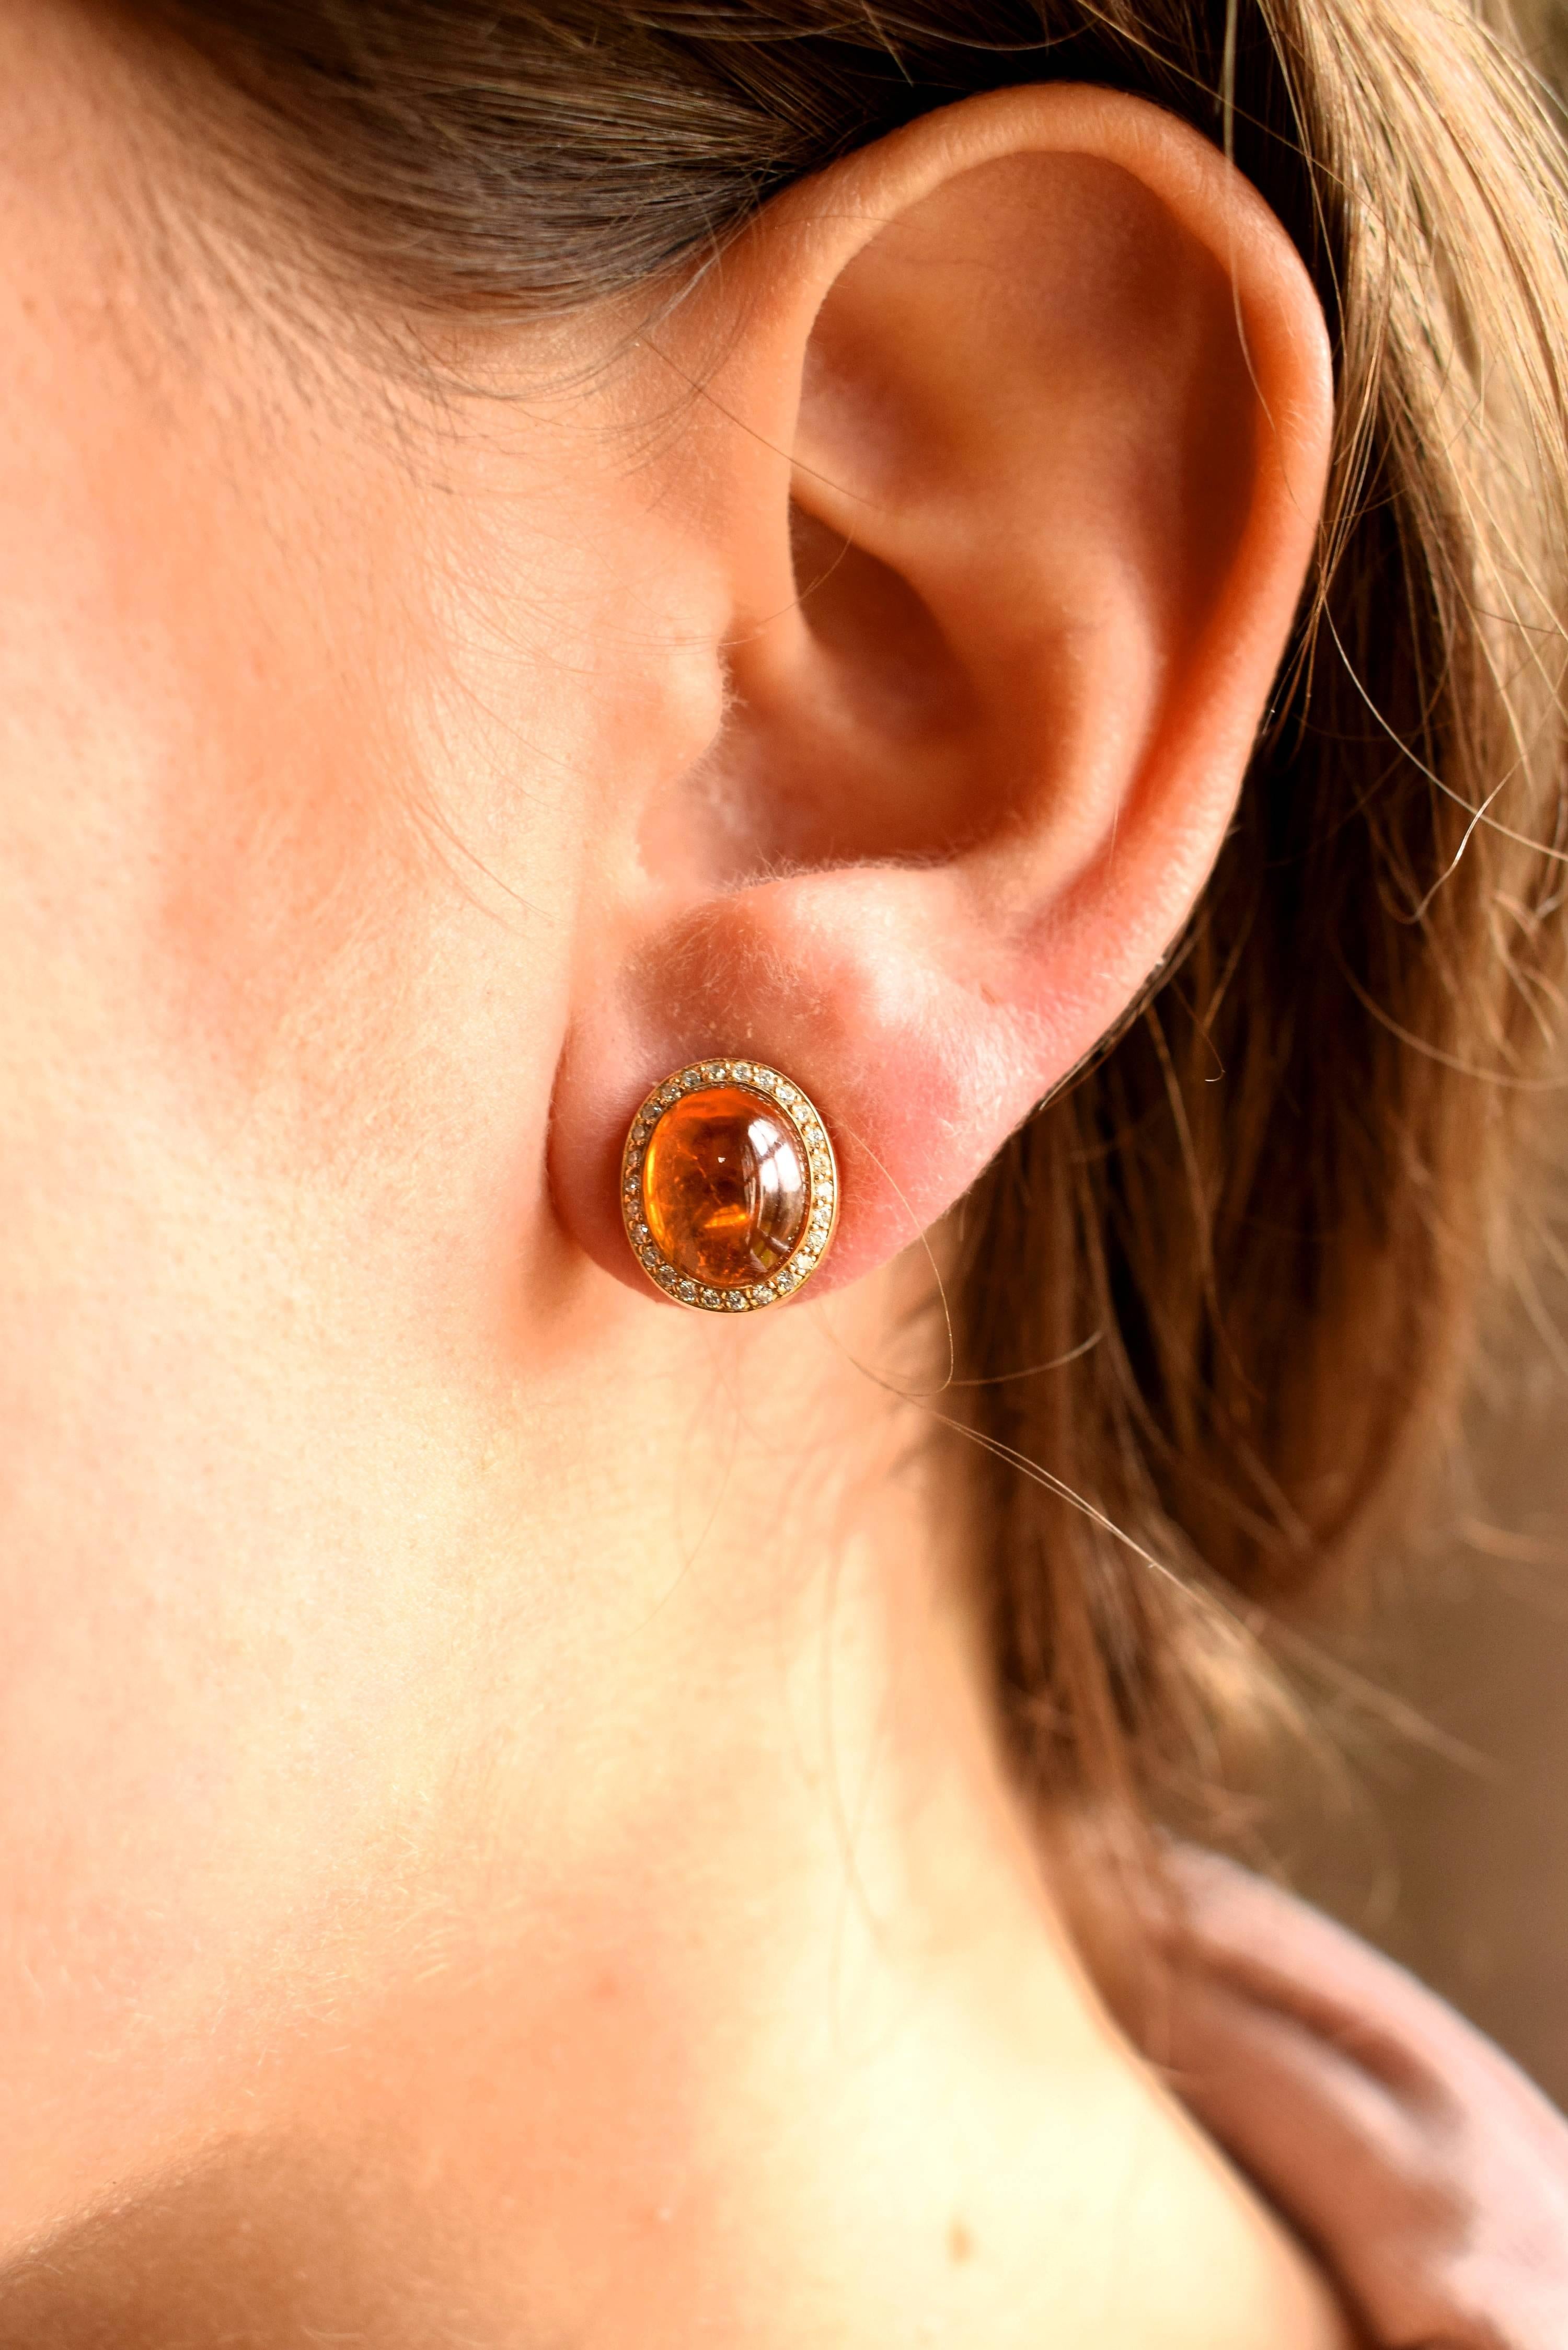 Oval Cut Earrings in Rose Gold with 2 Mandarine Garnet Cabouchons and Diamonds.